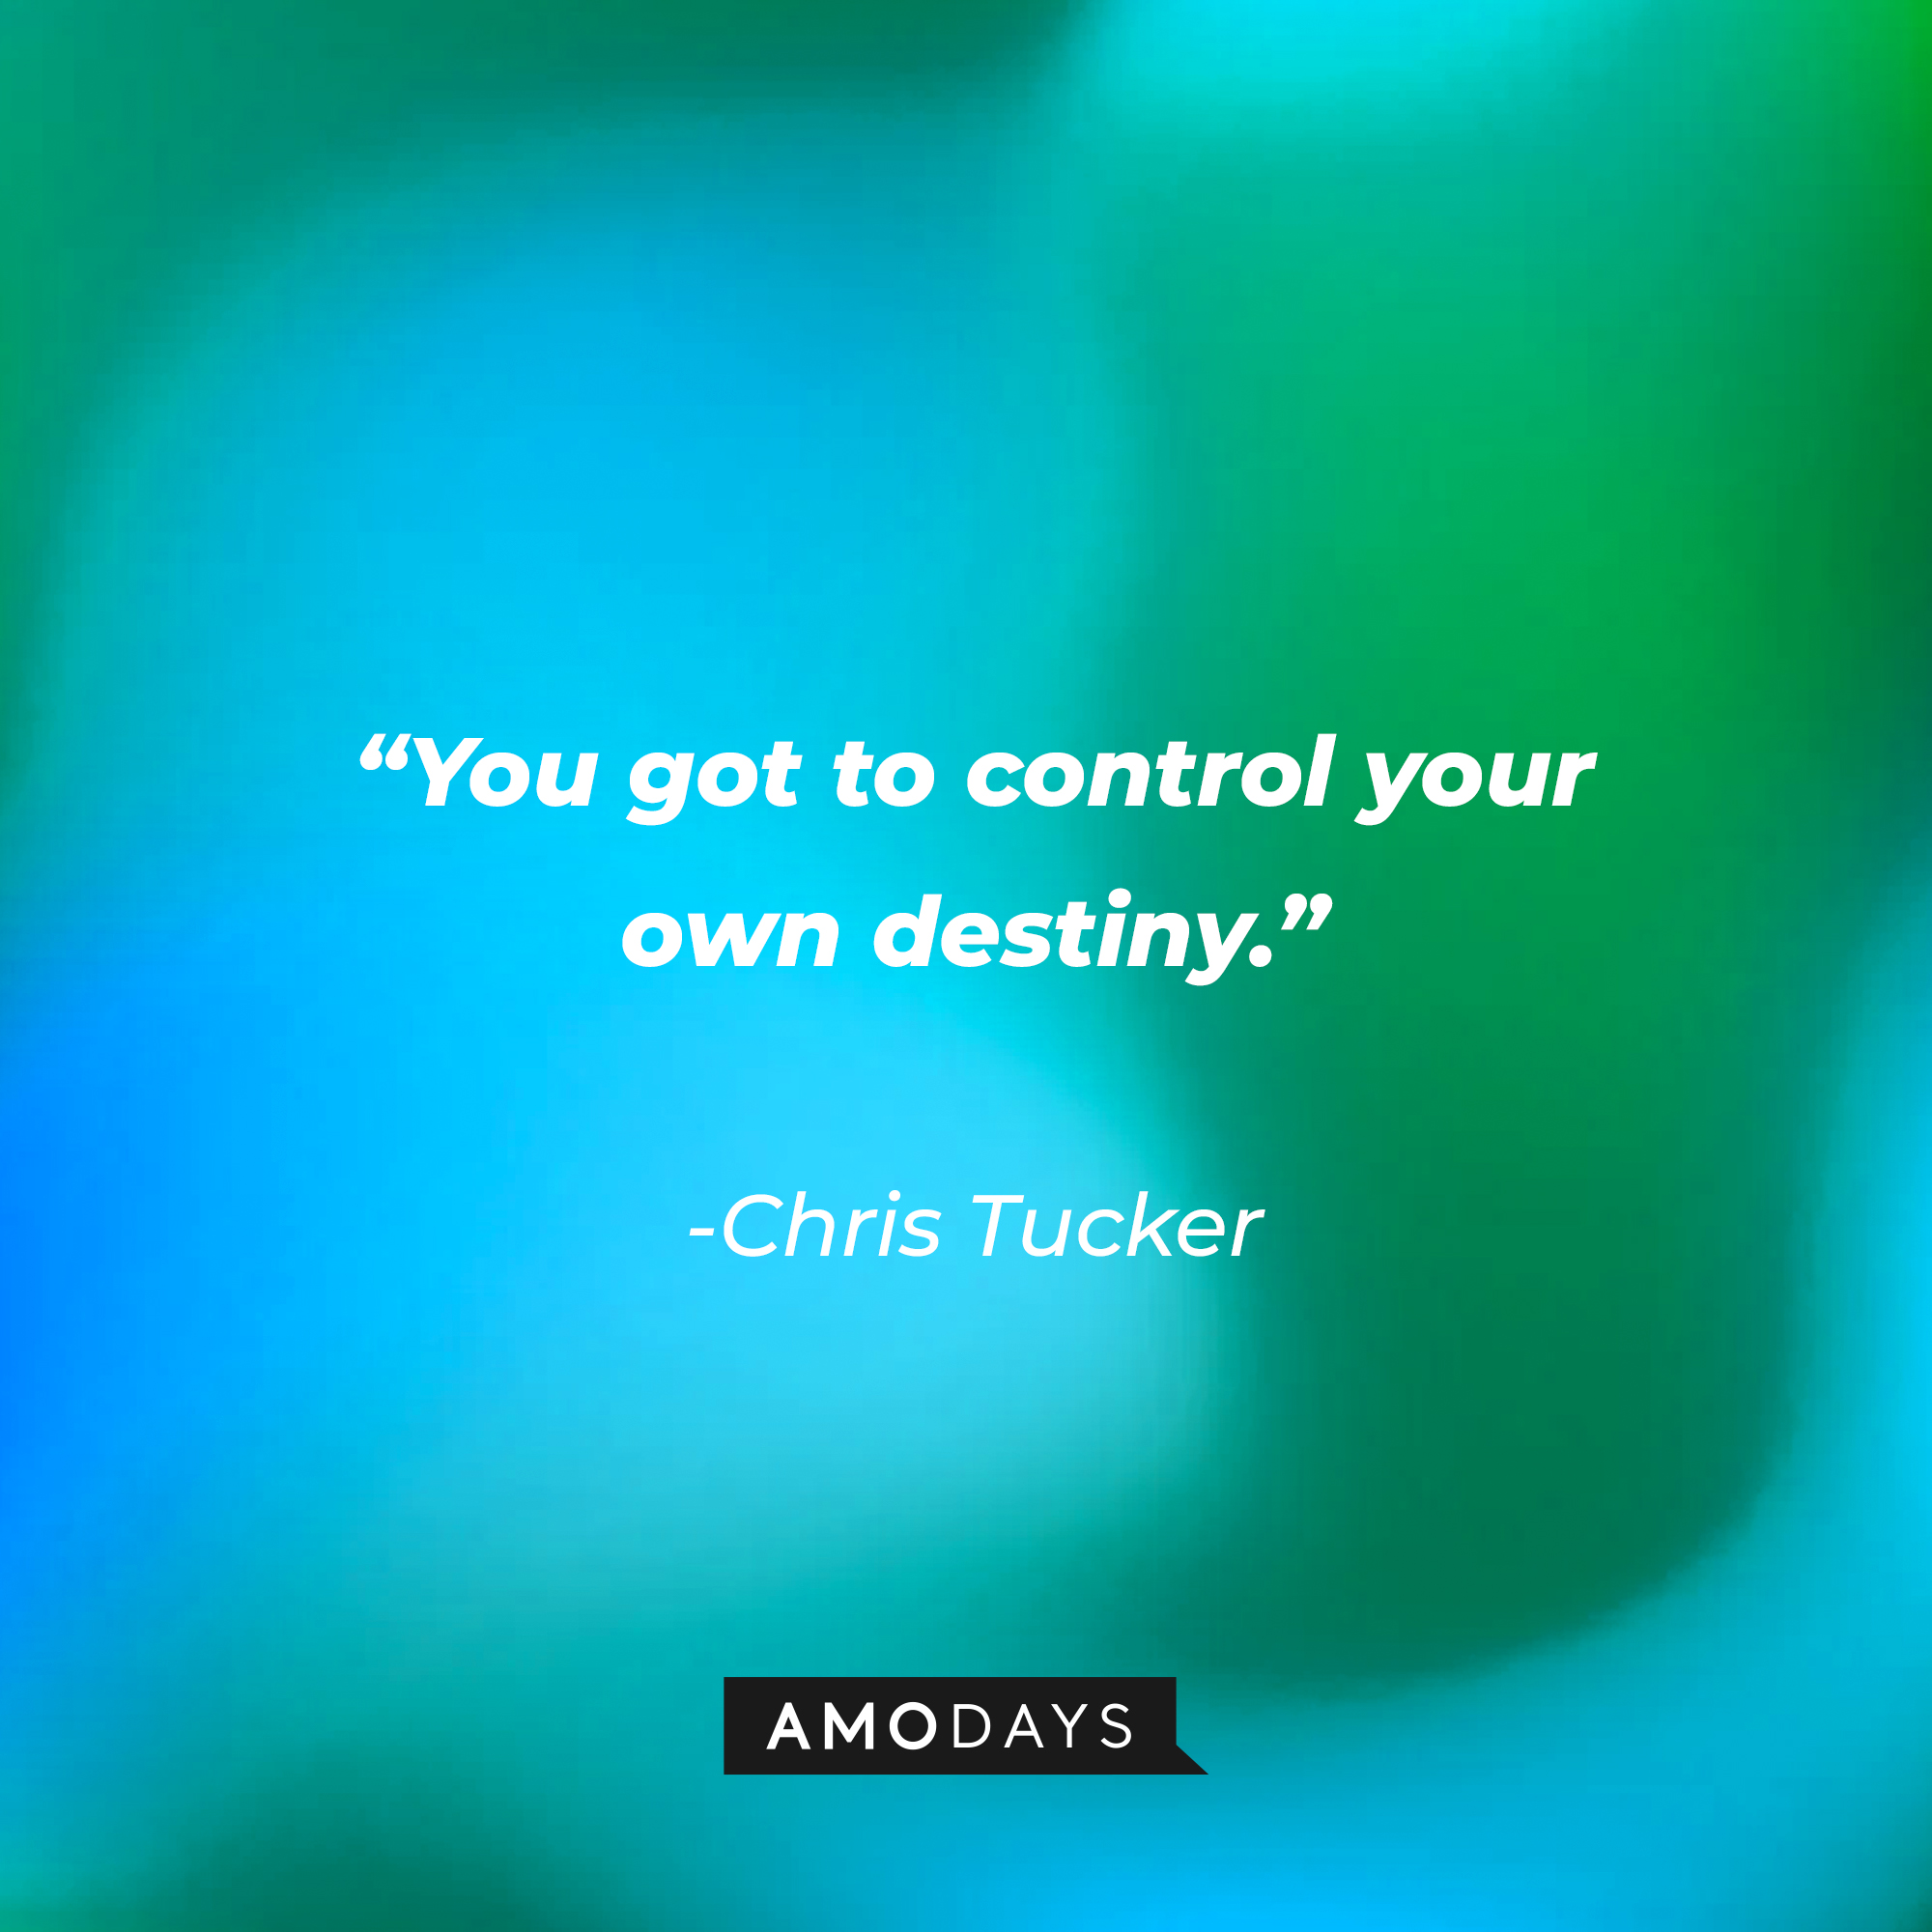 Chris Tucker’s quote: “You got to control your own destiny.”┃Source: AmoDays